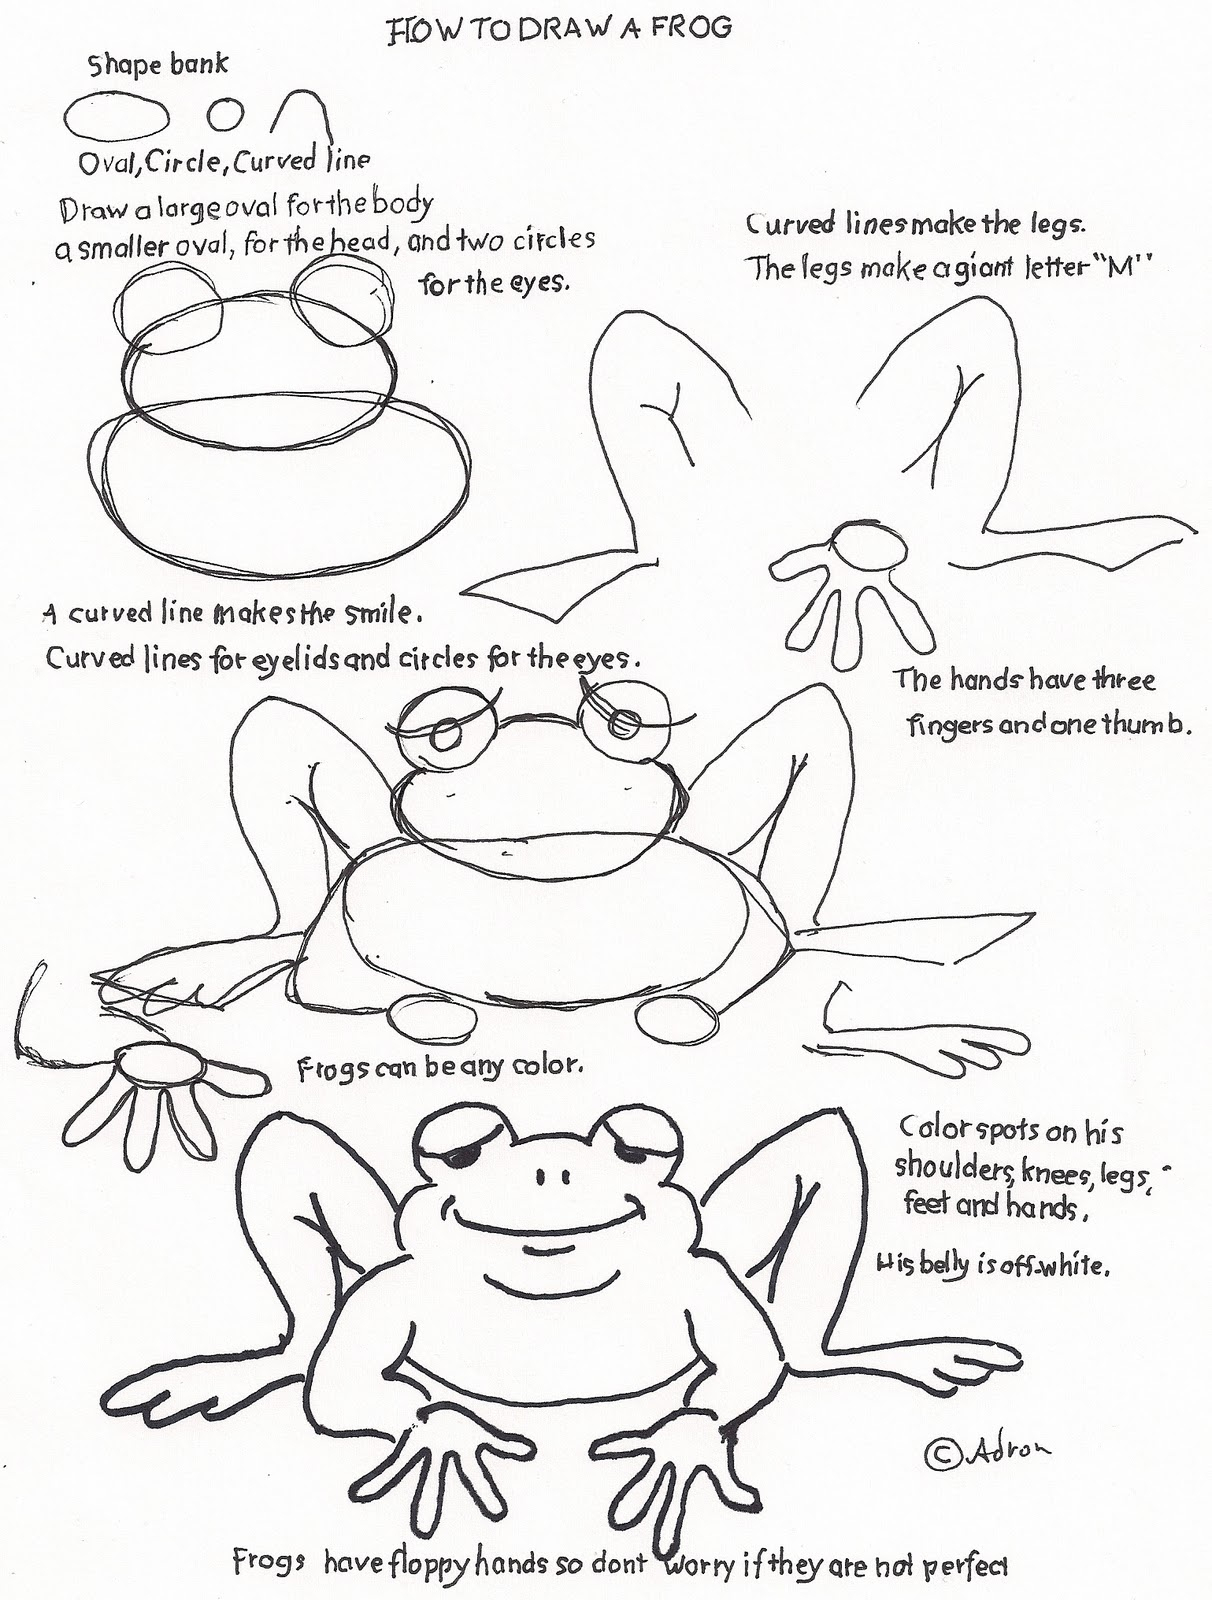 How To Draw Worksheets For The Young Artist: How To Draw A Frog | The Frog Prince Worksheets Printable